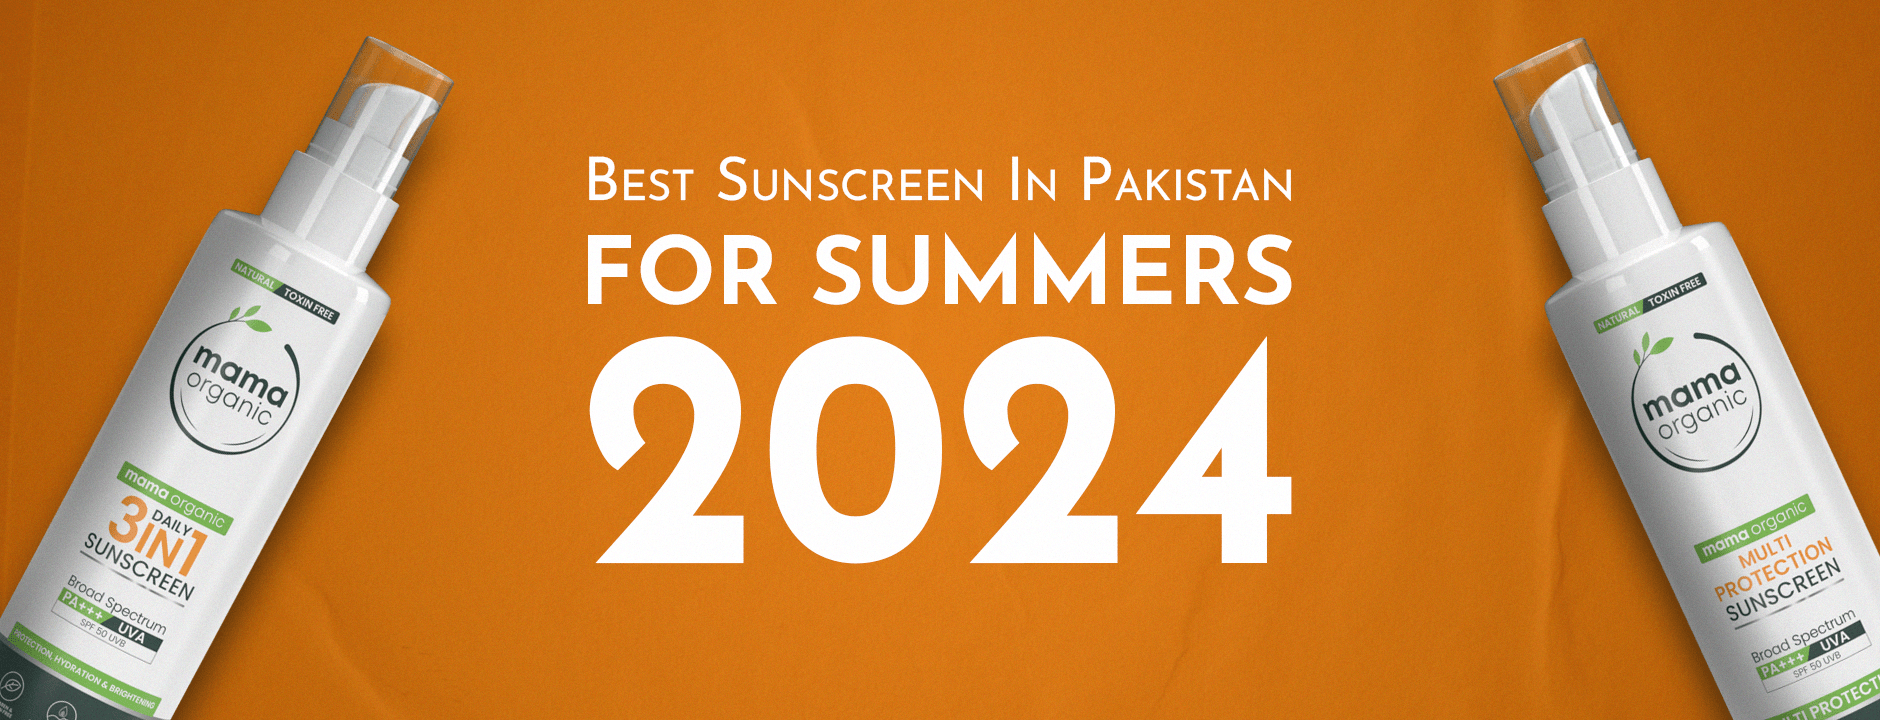 Best Sunscreen in Pakistan for Summers: 2024